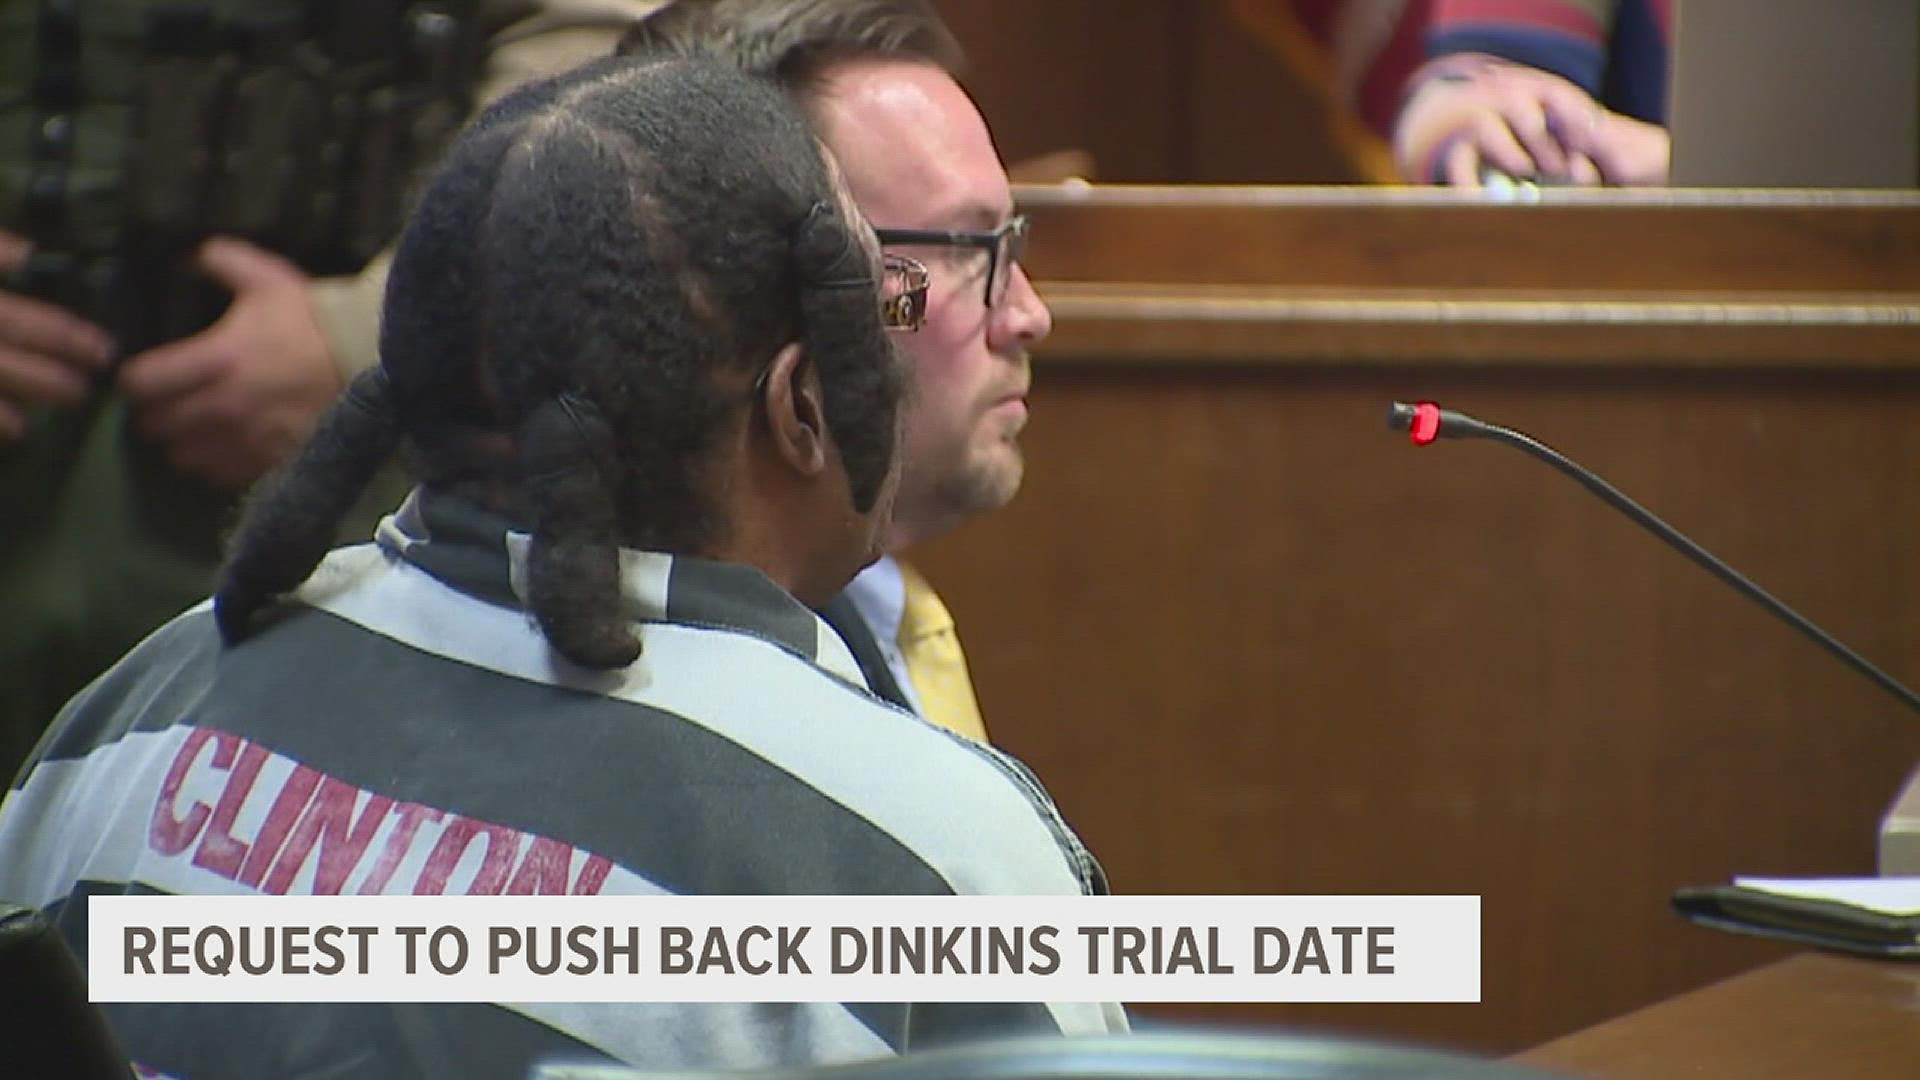 The trial has already been pushed back once, but Henry Dinkins received a new defense five months ago.